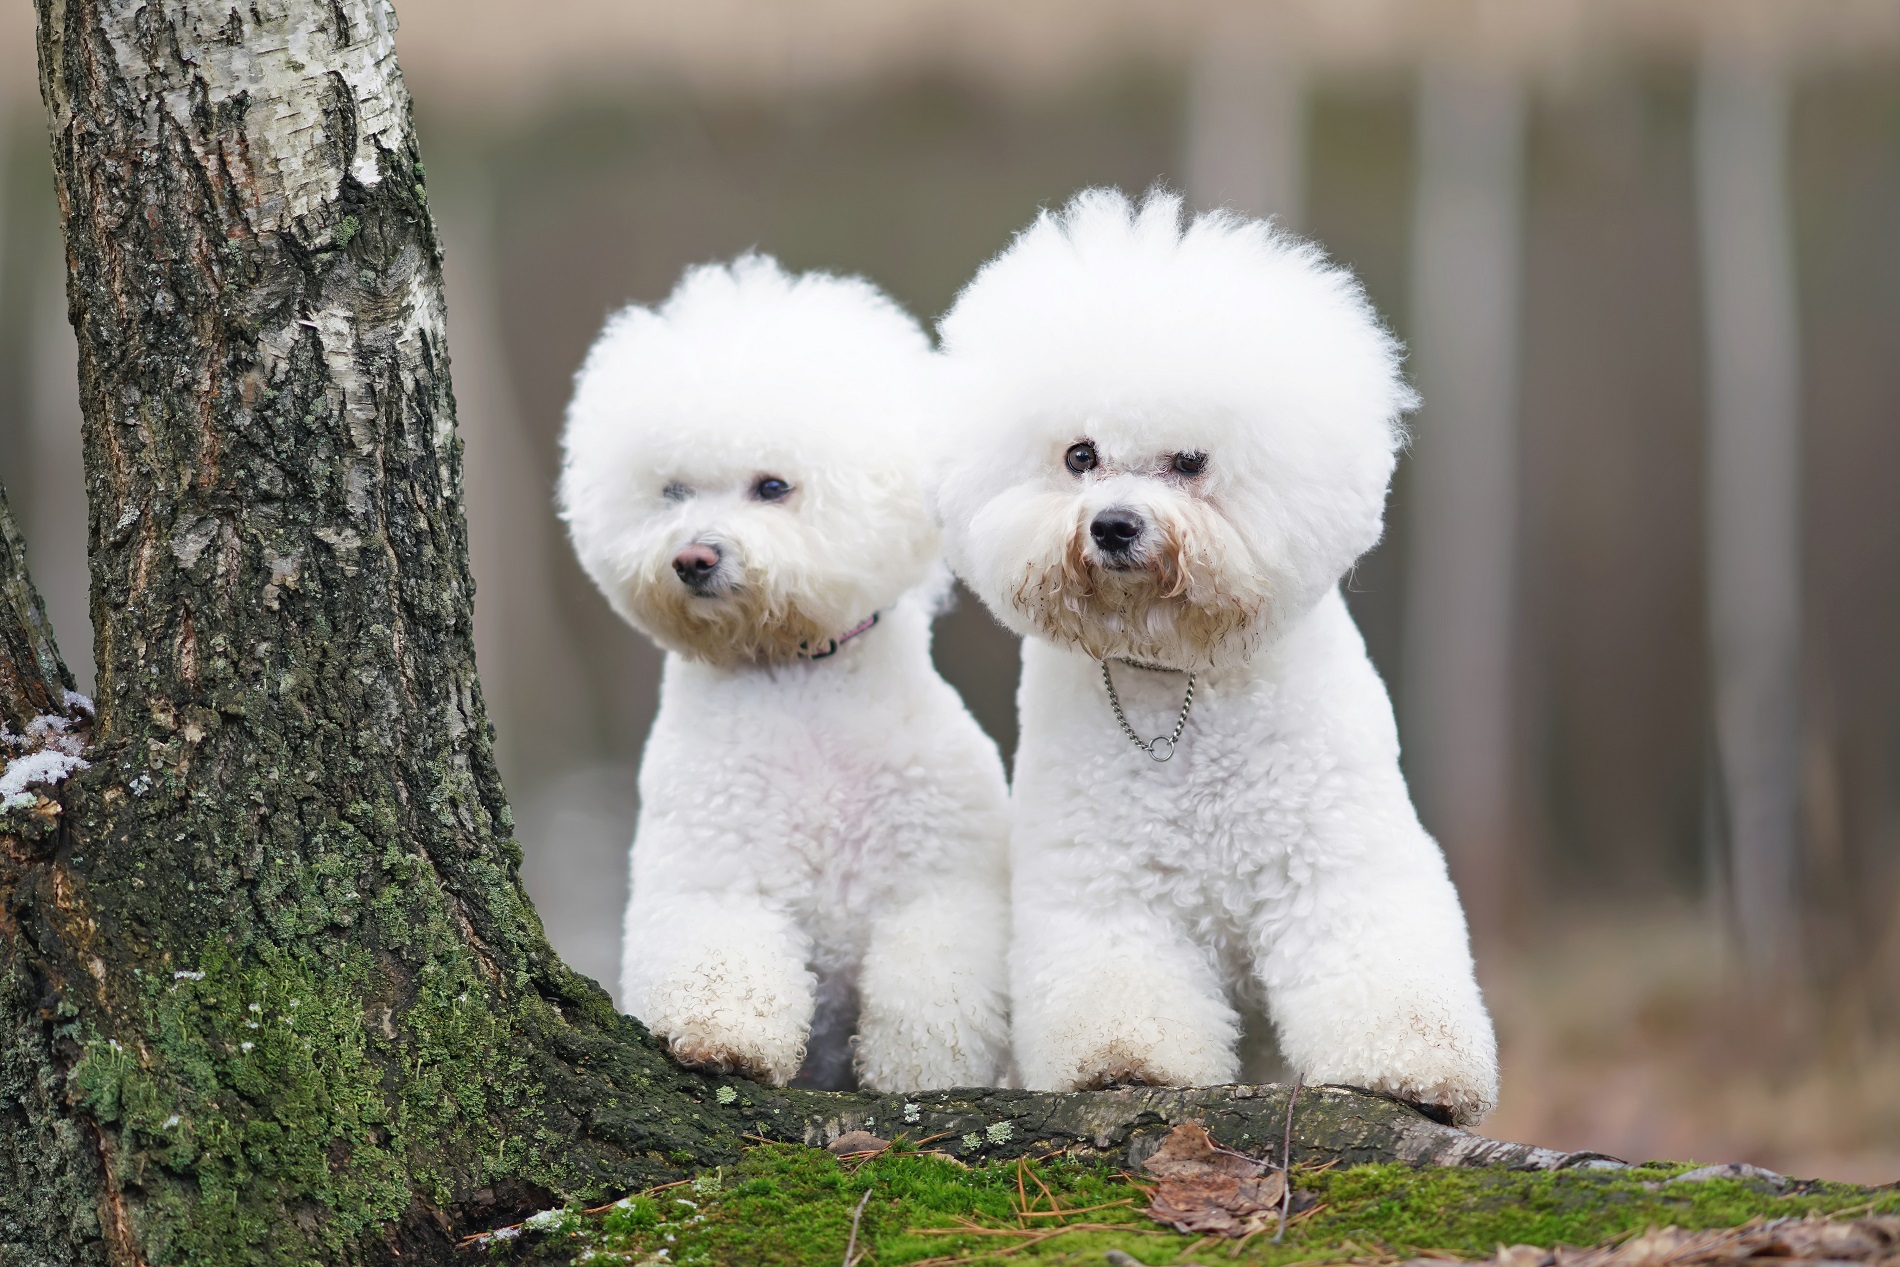 Adorable Bichon Frise dogs with stylish haircuts posing outdoors in a forest